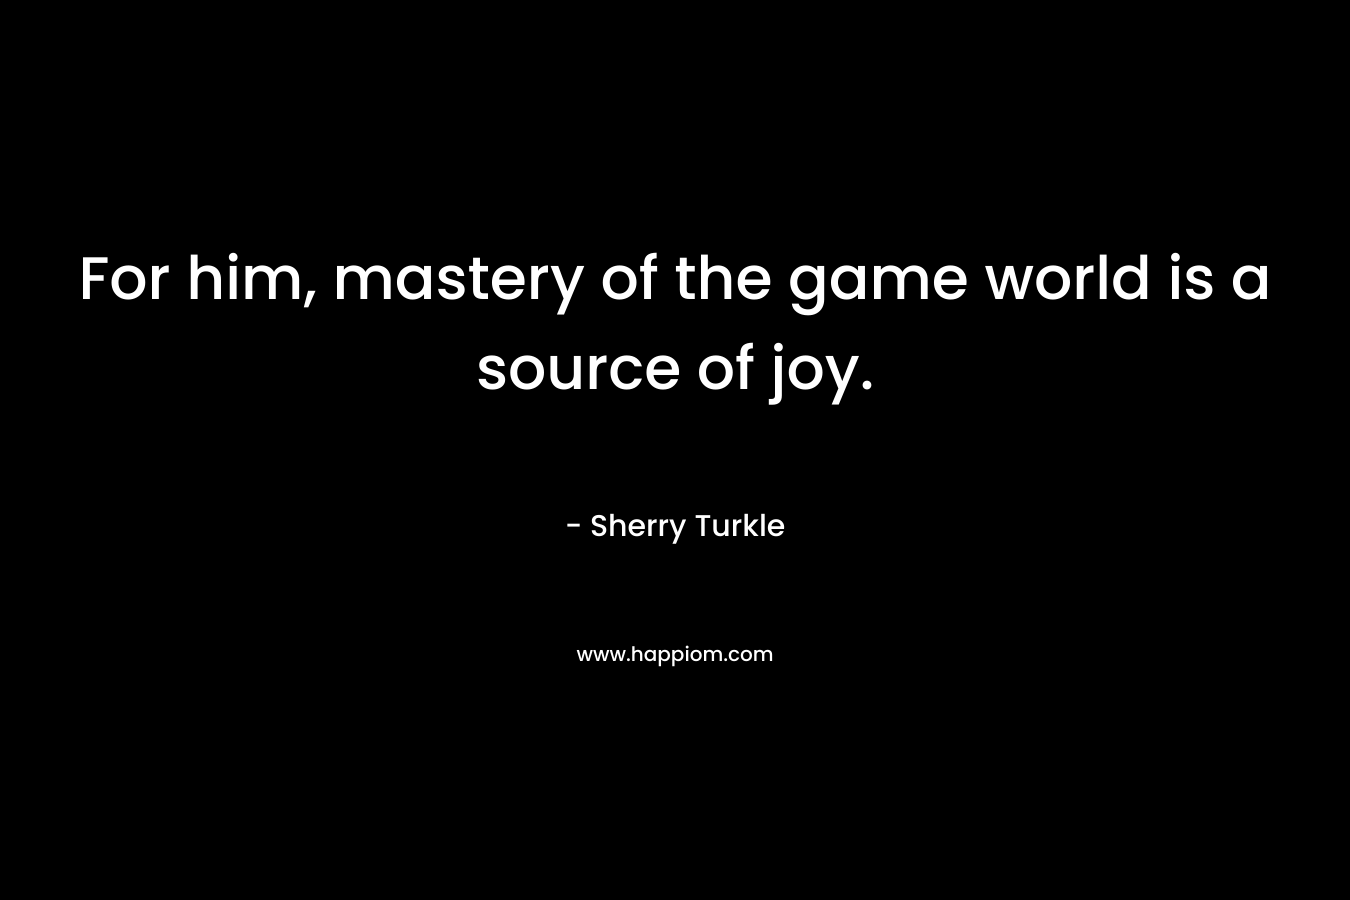 For him, mastery of the game world is a source of joy. – Sherry Turkle